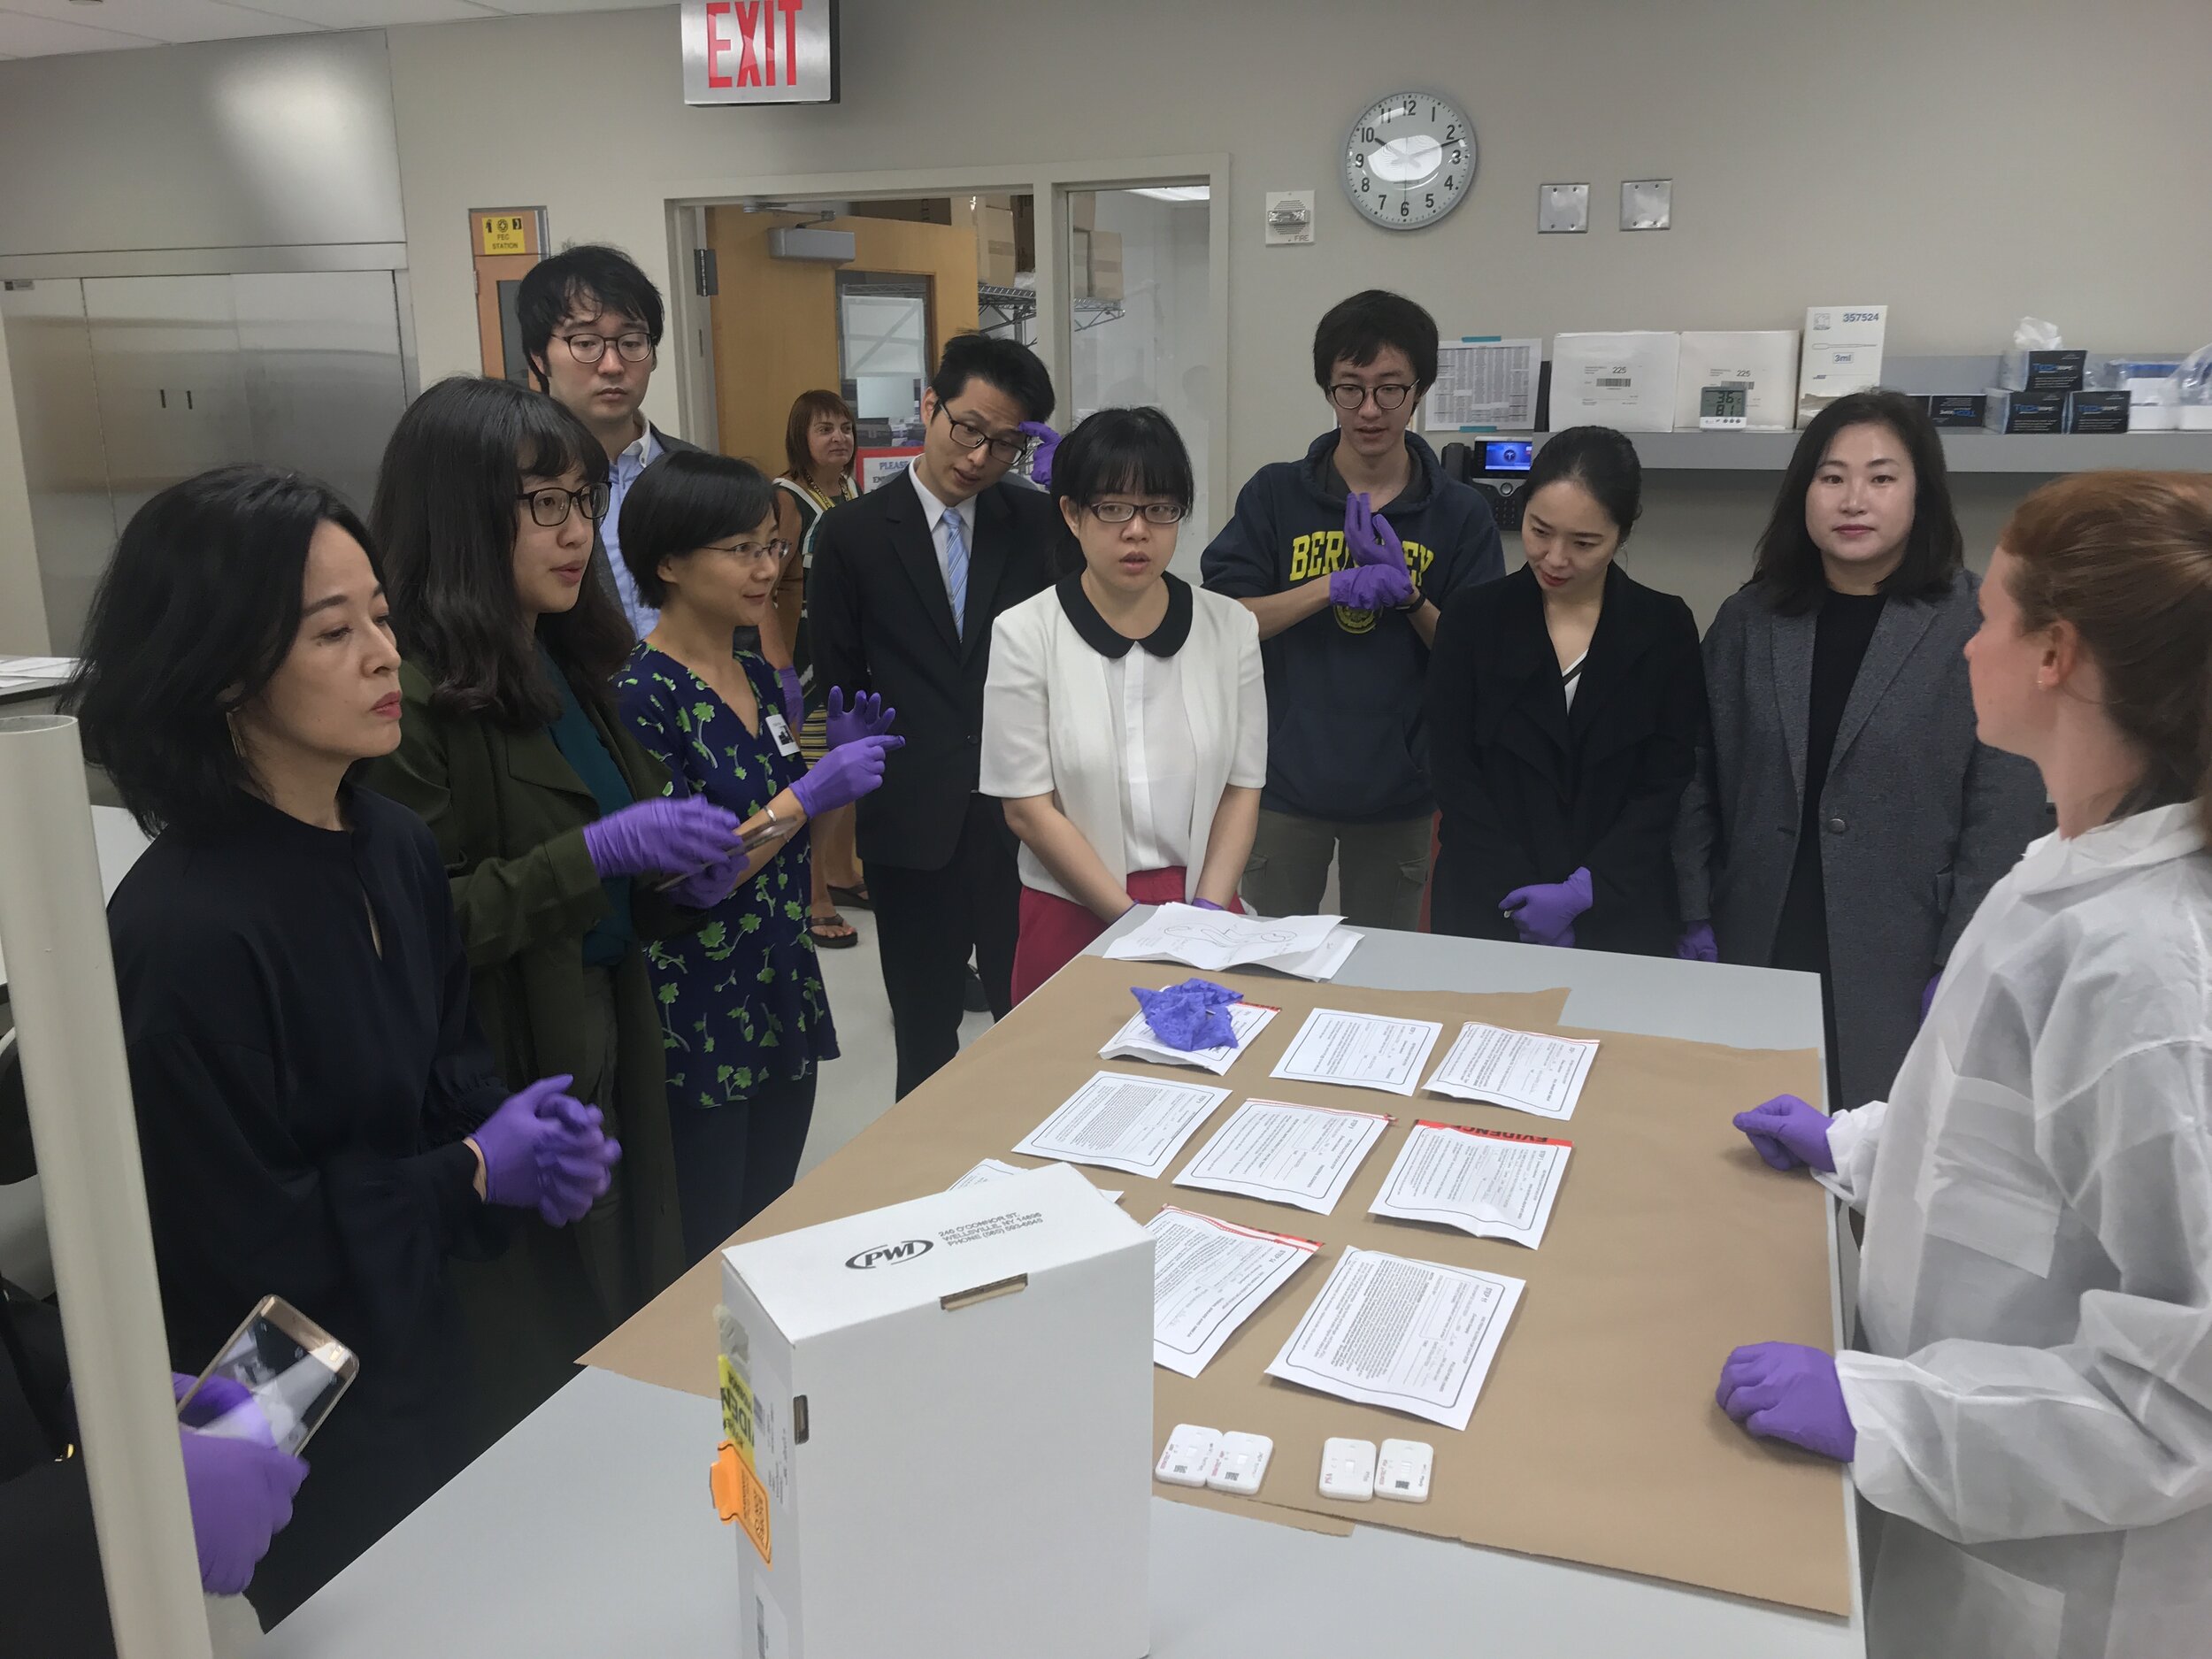 A visit to the Chief Medical Examiner's DNA Lab